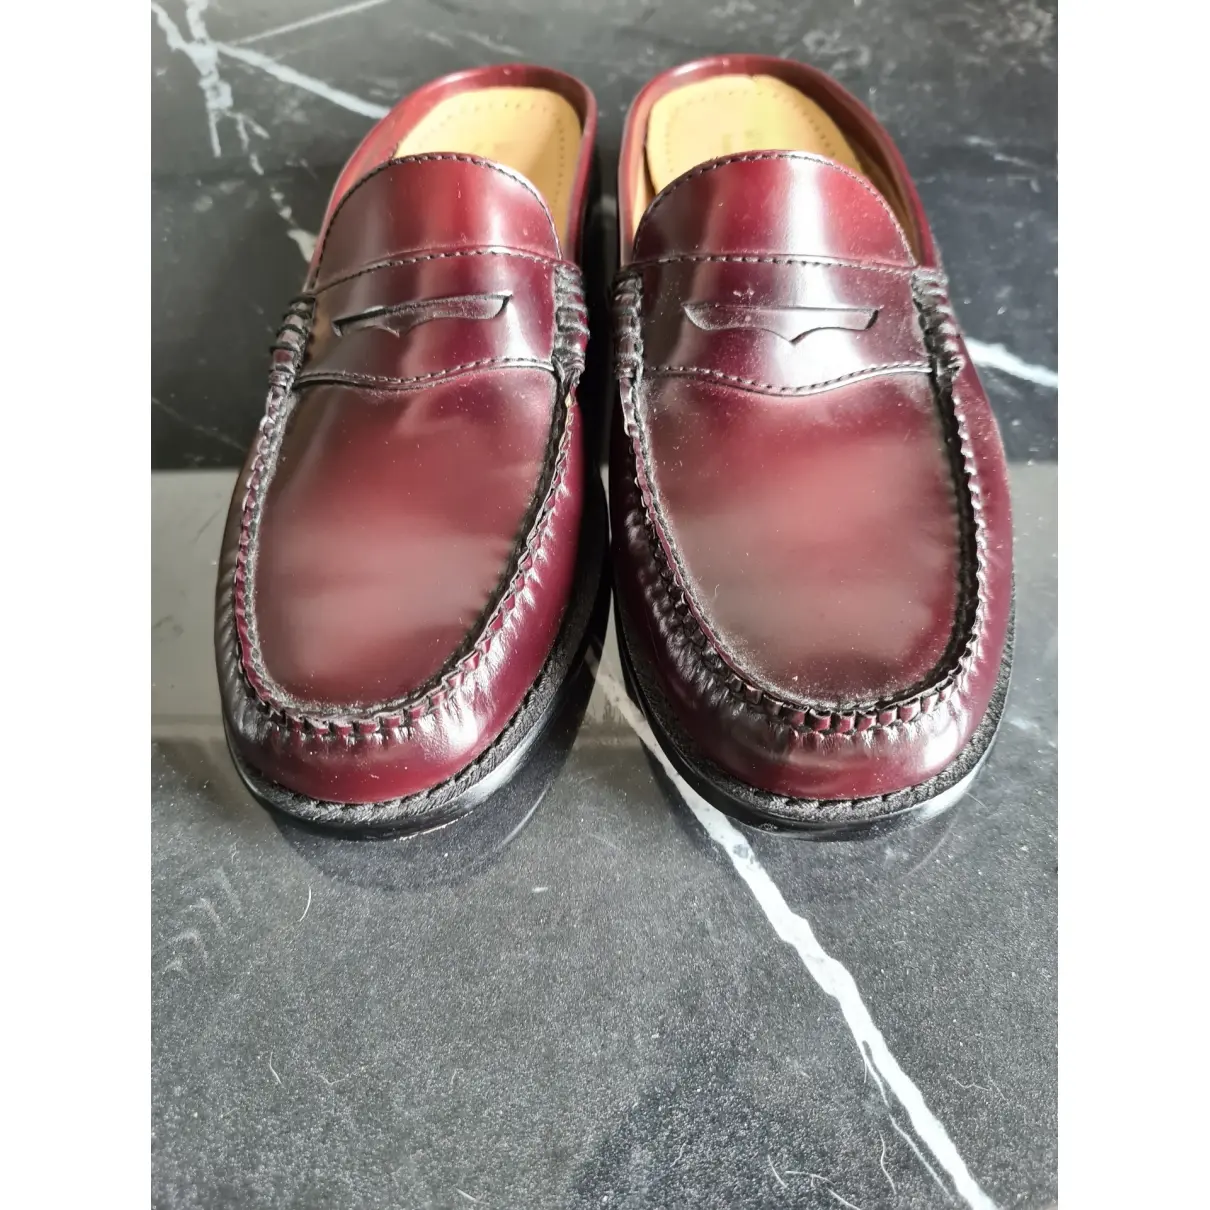 Bass Weejun Leather flats for sale